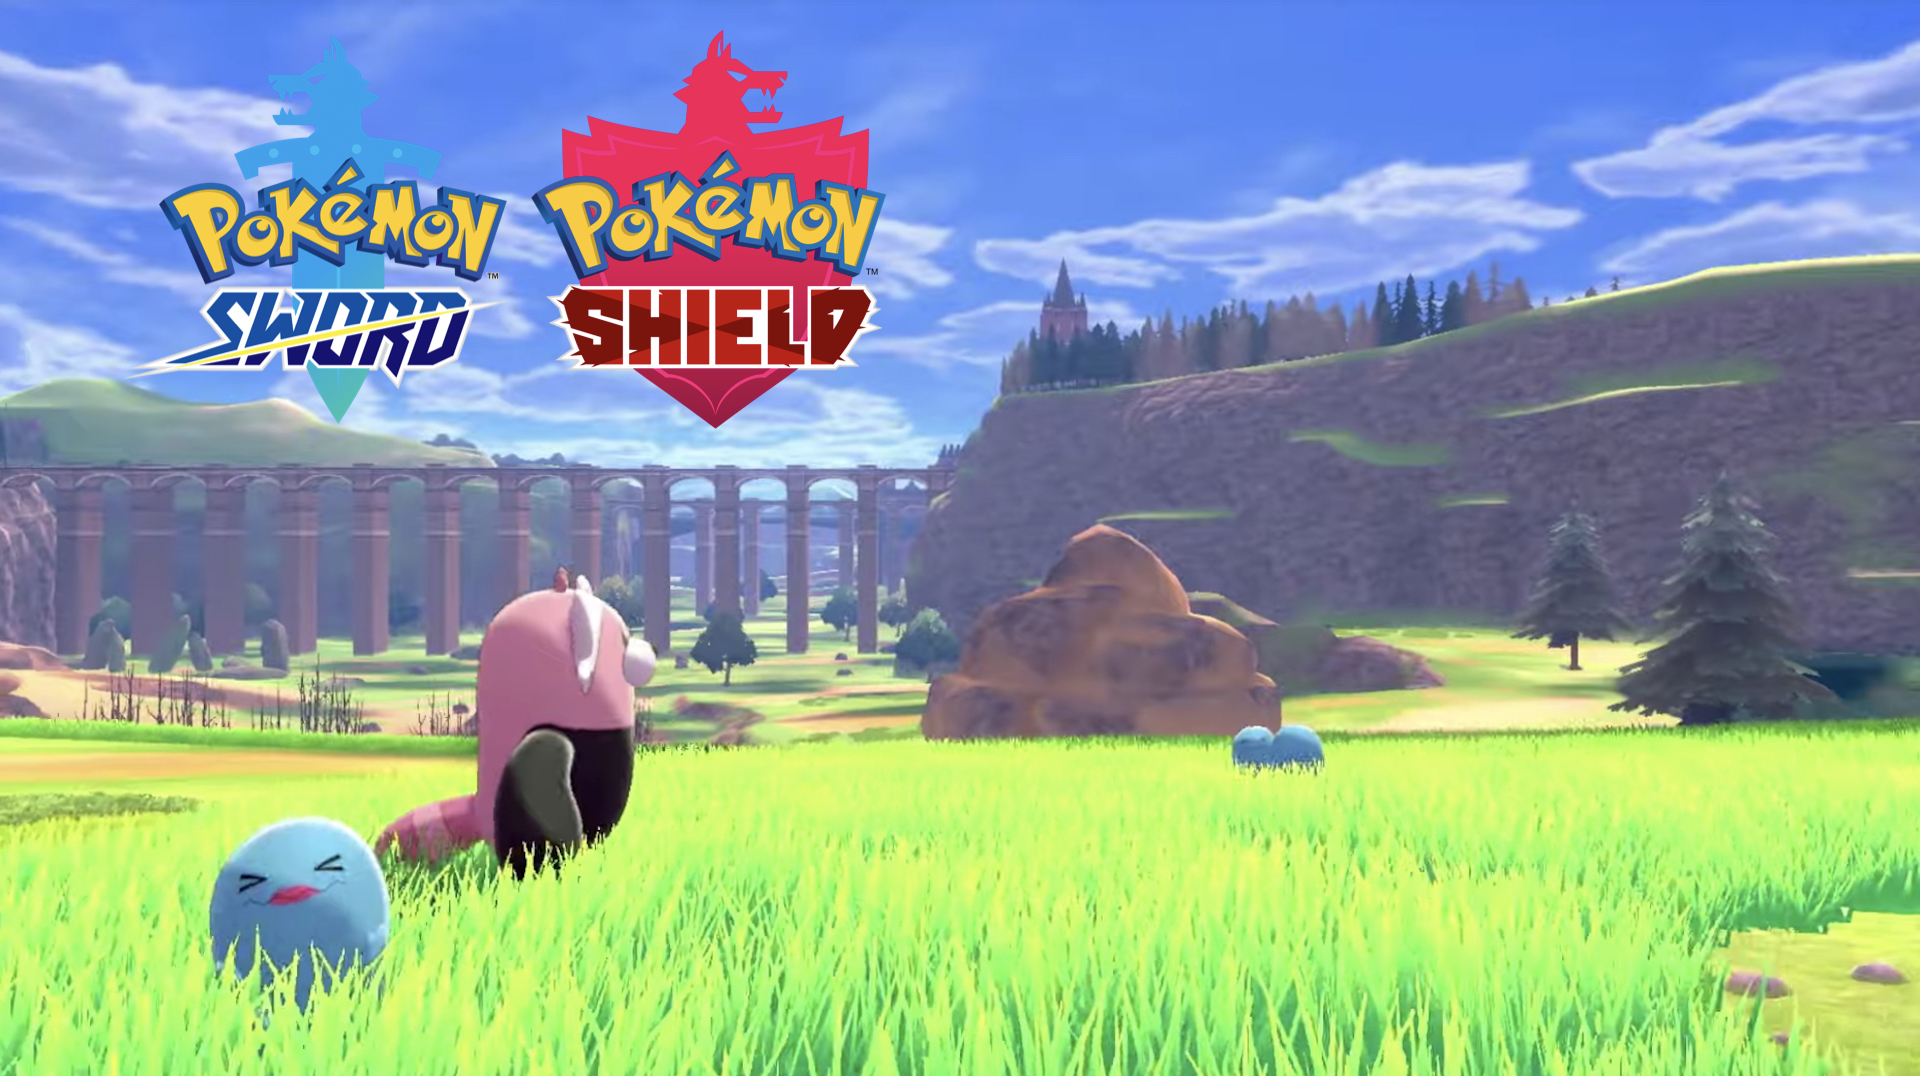 Pokemon Sword And Shield Developer Responds To Pokedex Controversy Without Really Saying Anything